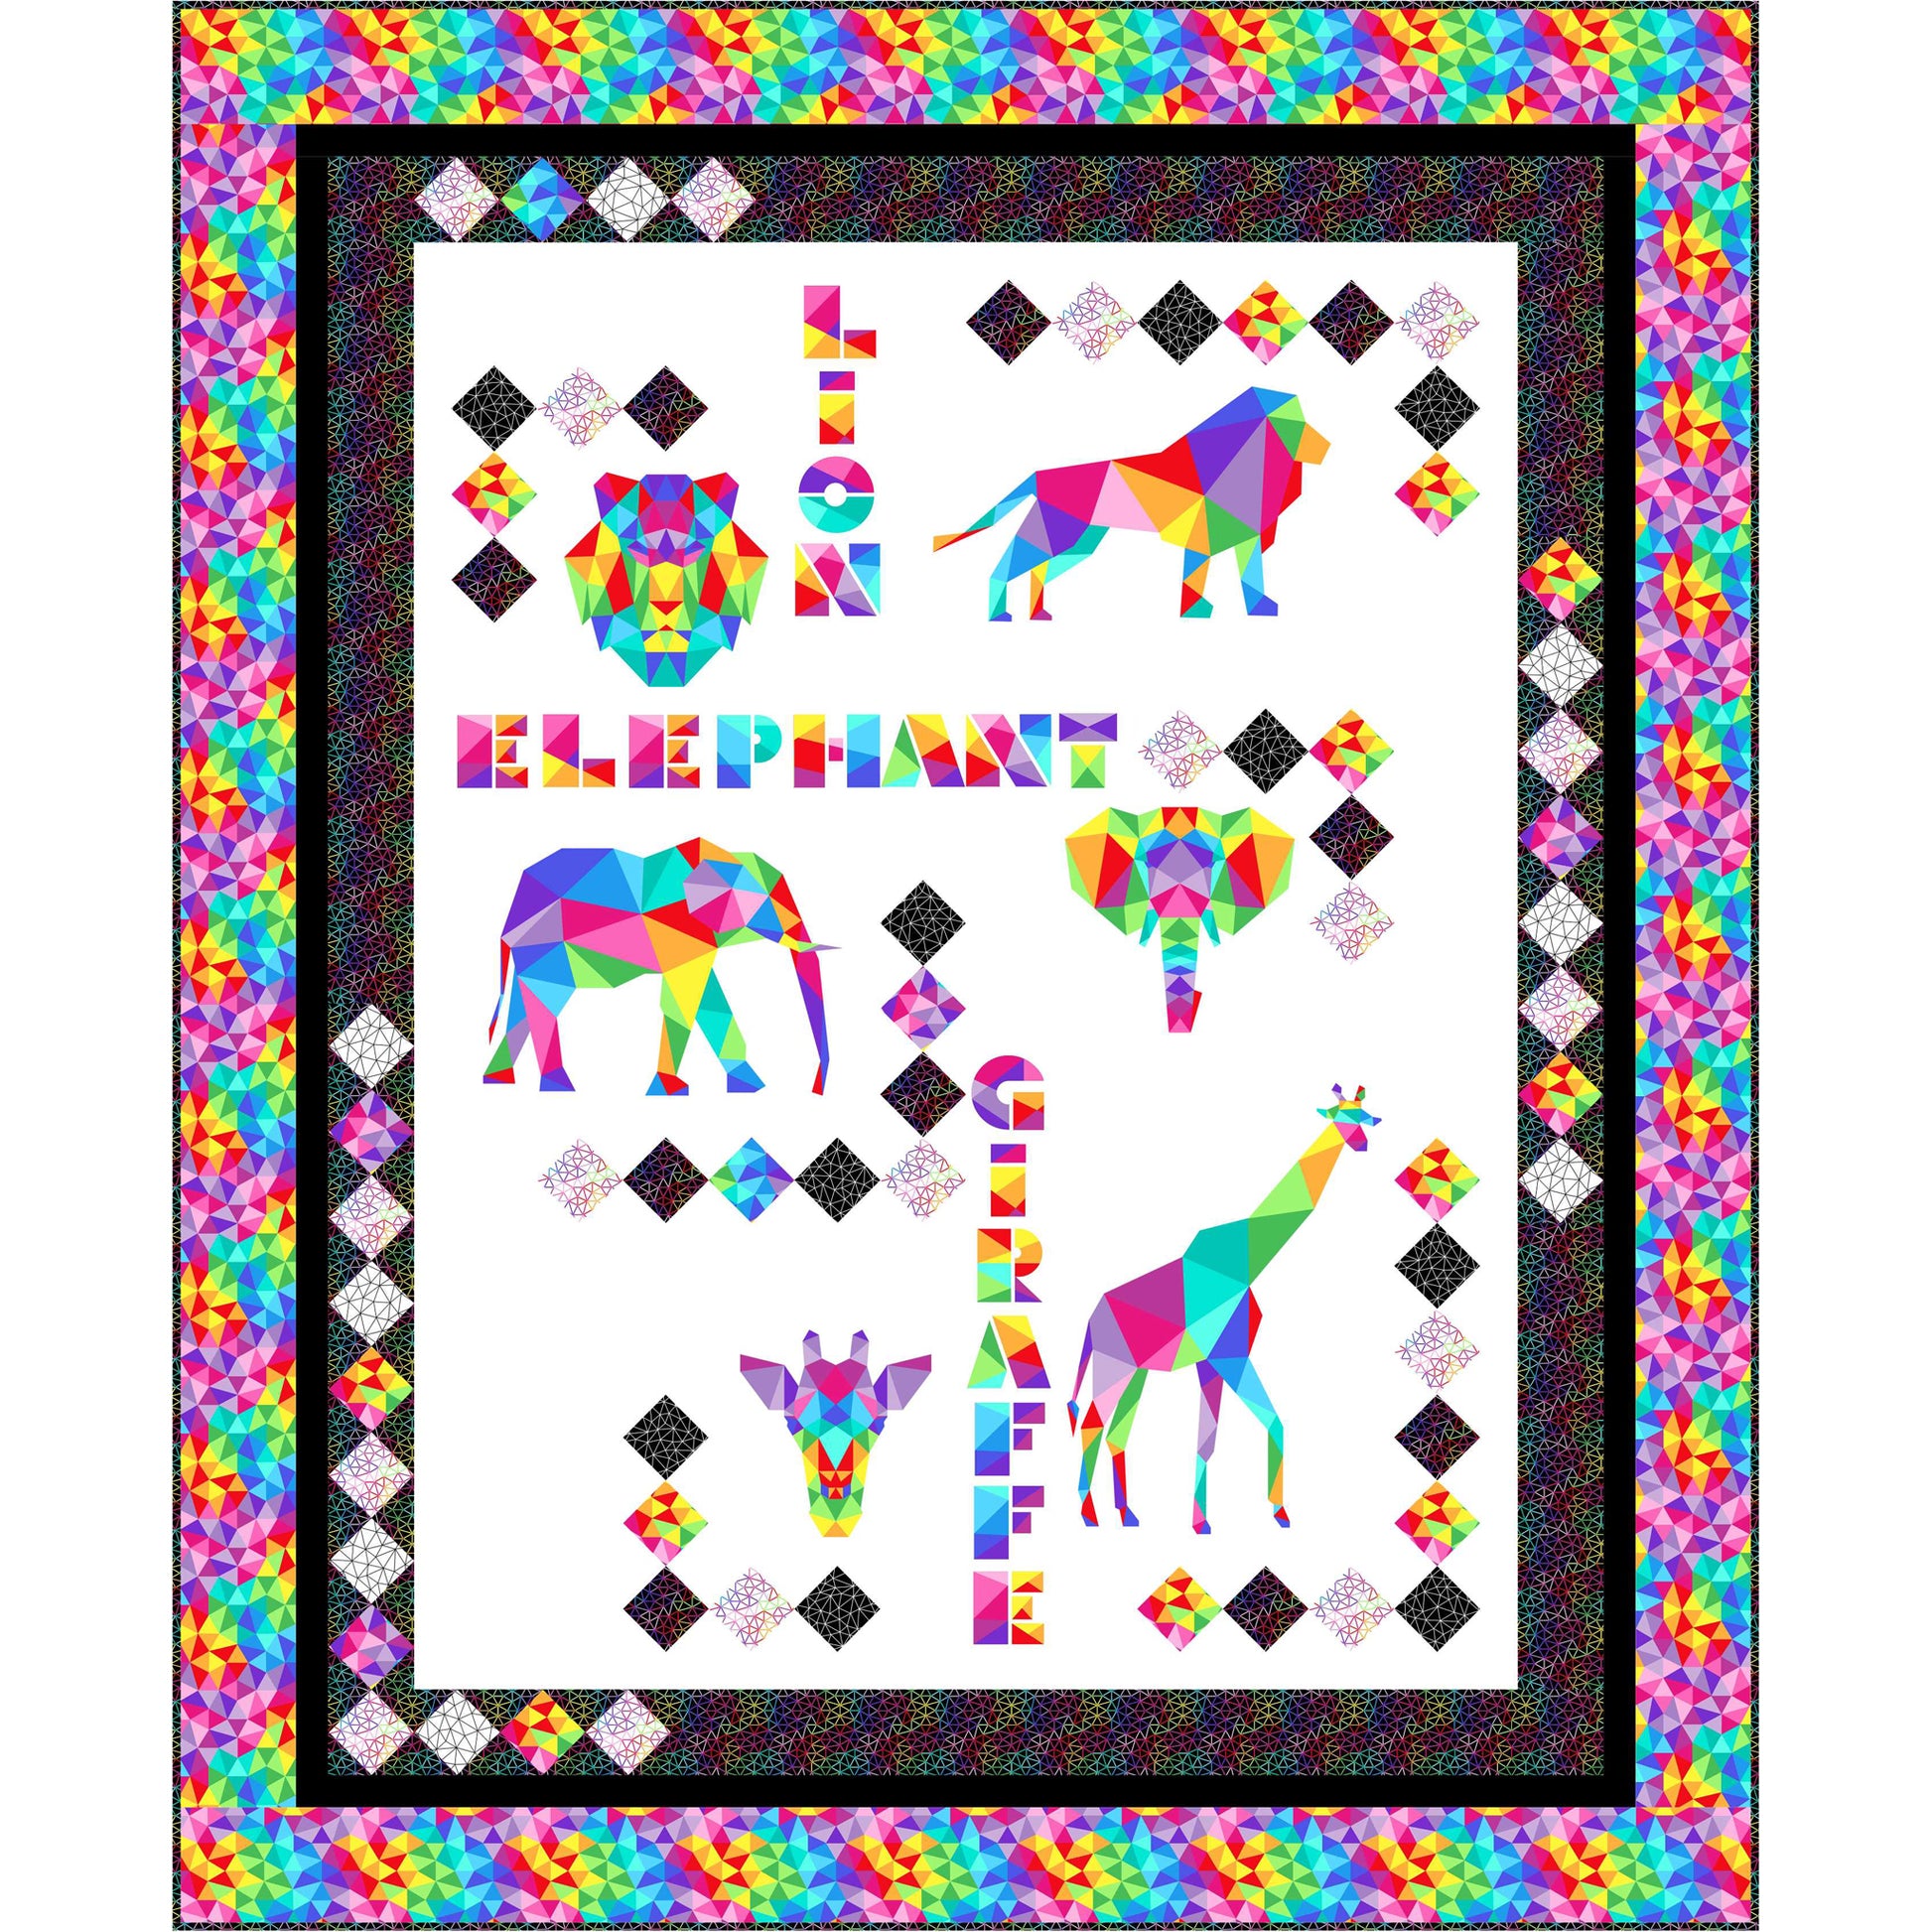 Colorful animals quilt has animals which look like stained glass in bright colors. Animals include a lion, elephant, and giraffe. Names and heads also shown.